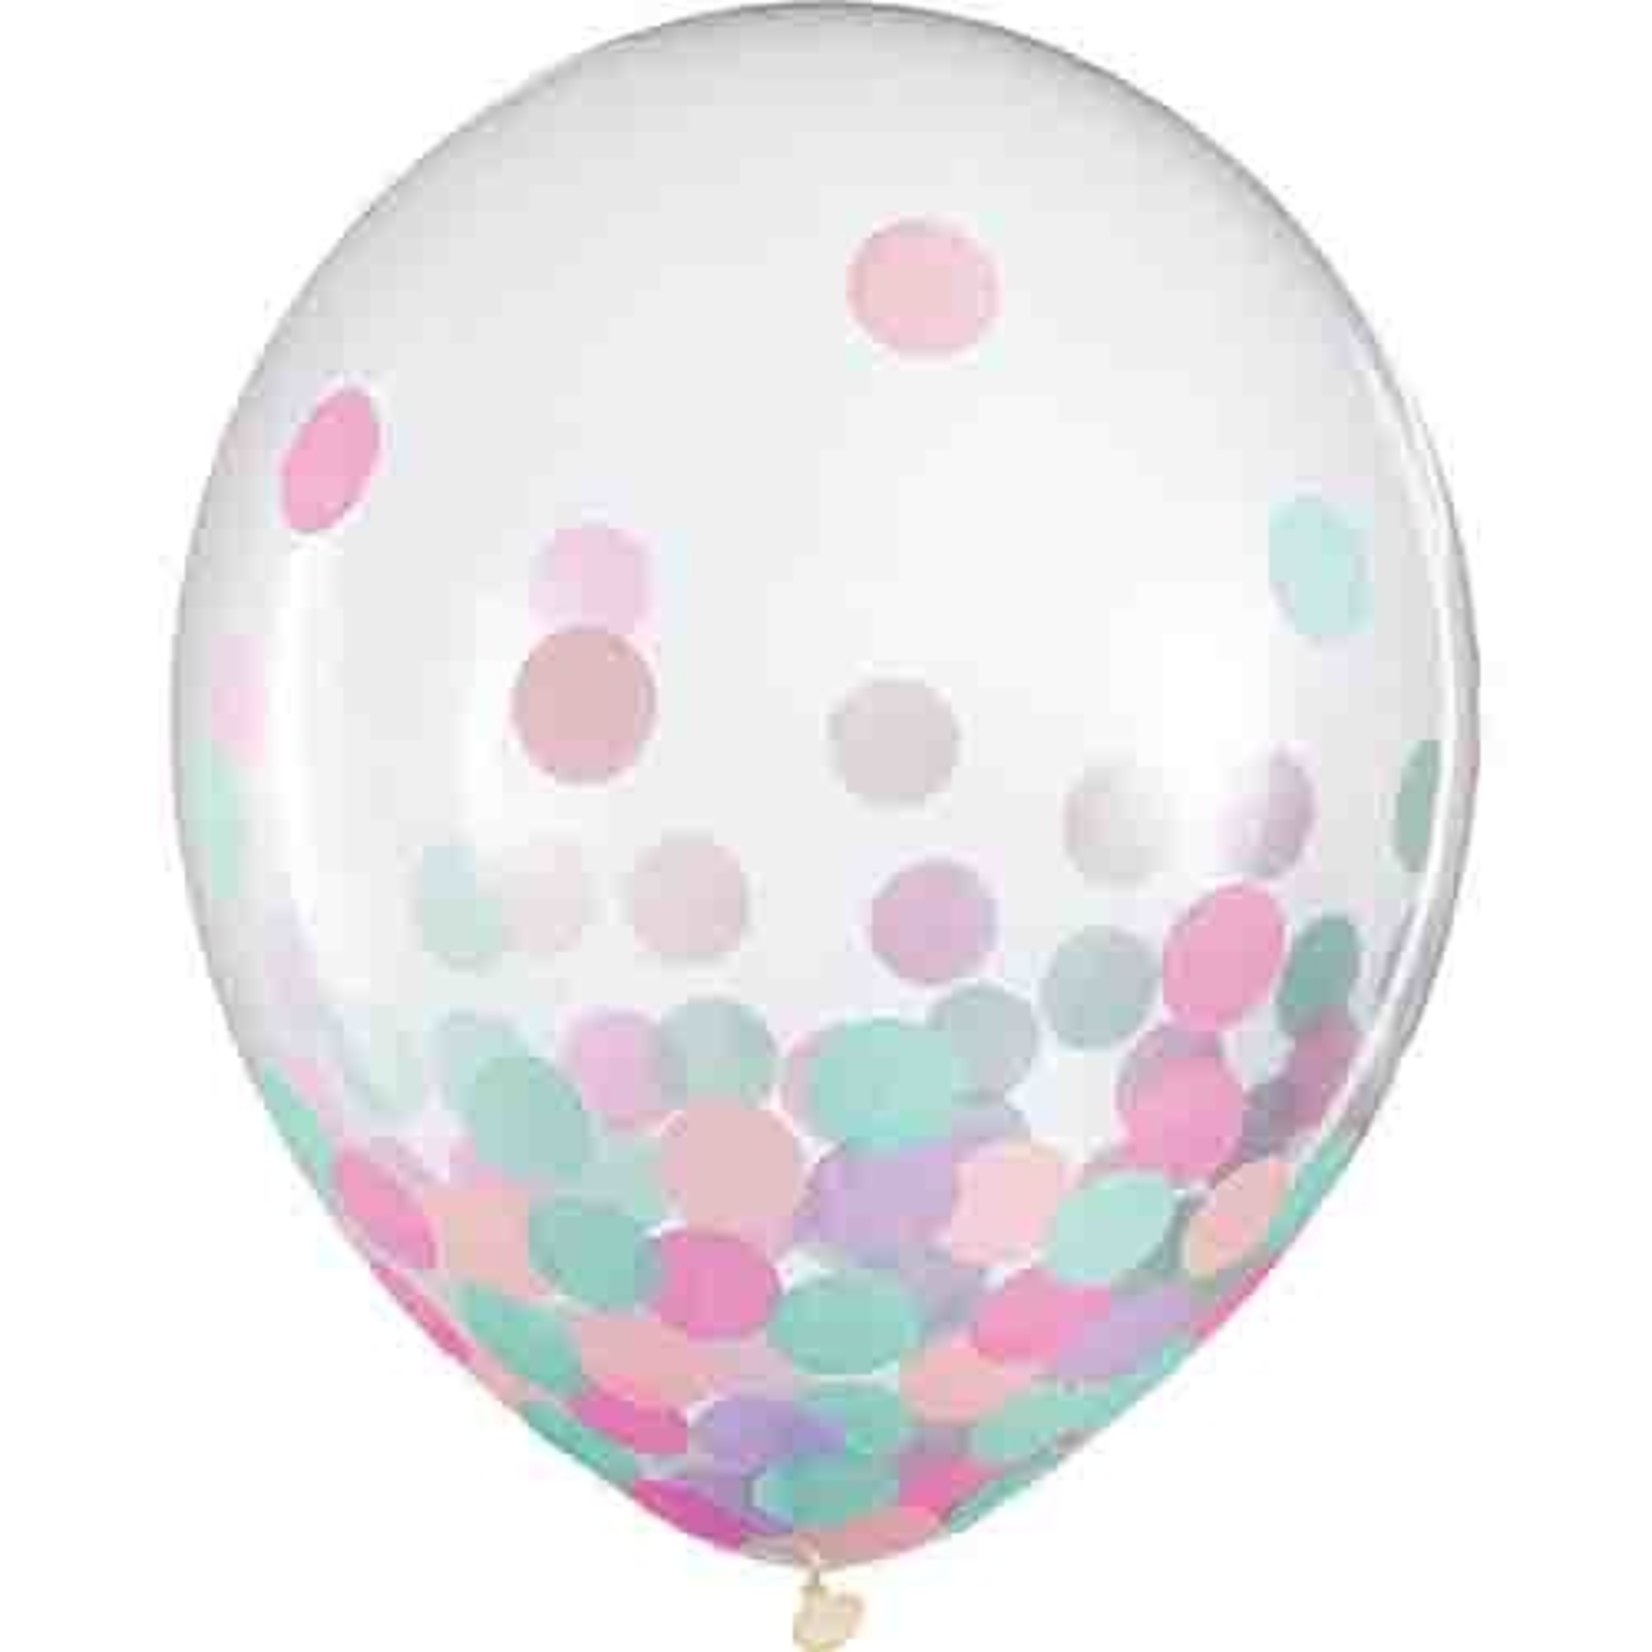 Amscan 12" Teal & Pink Confetti-Filled Latex Balloons - 6ct.